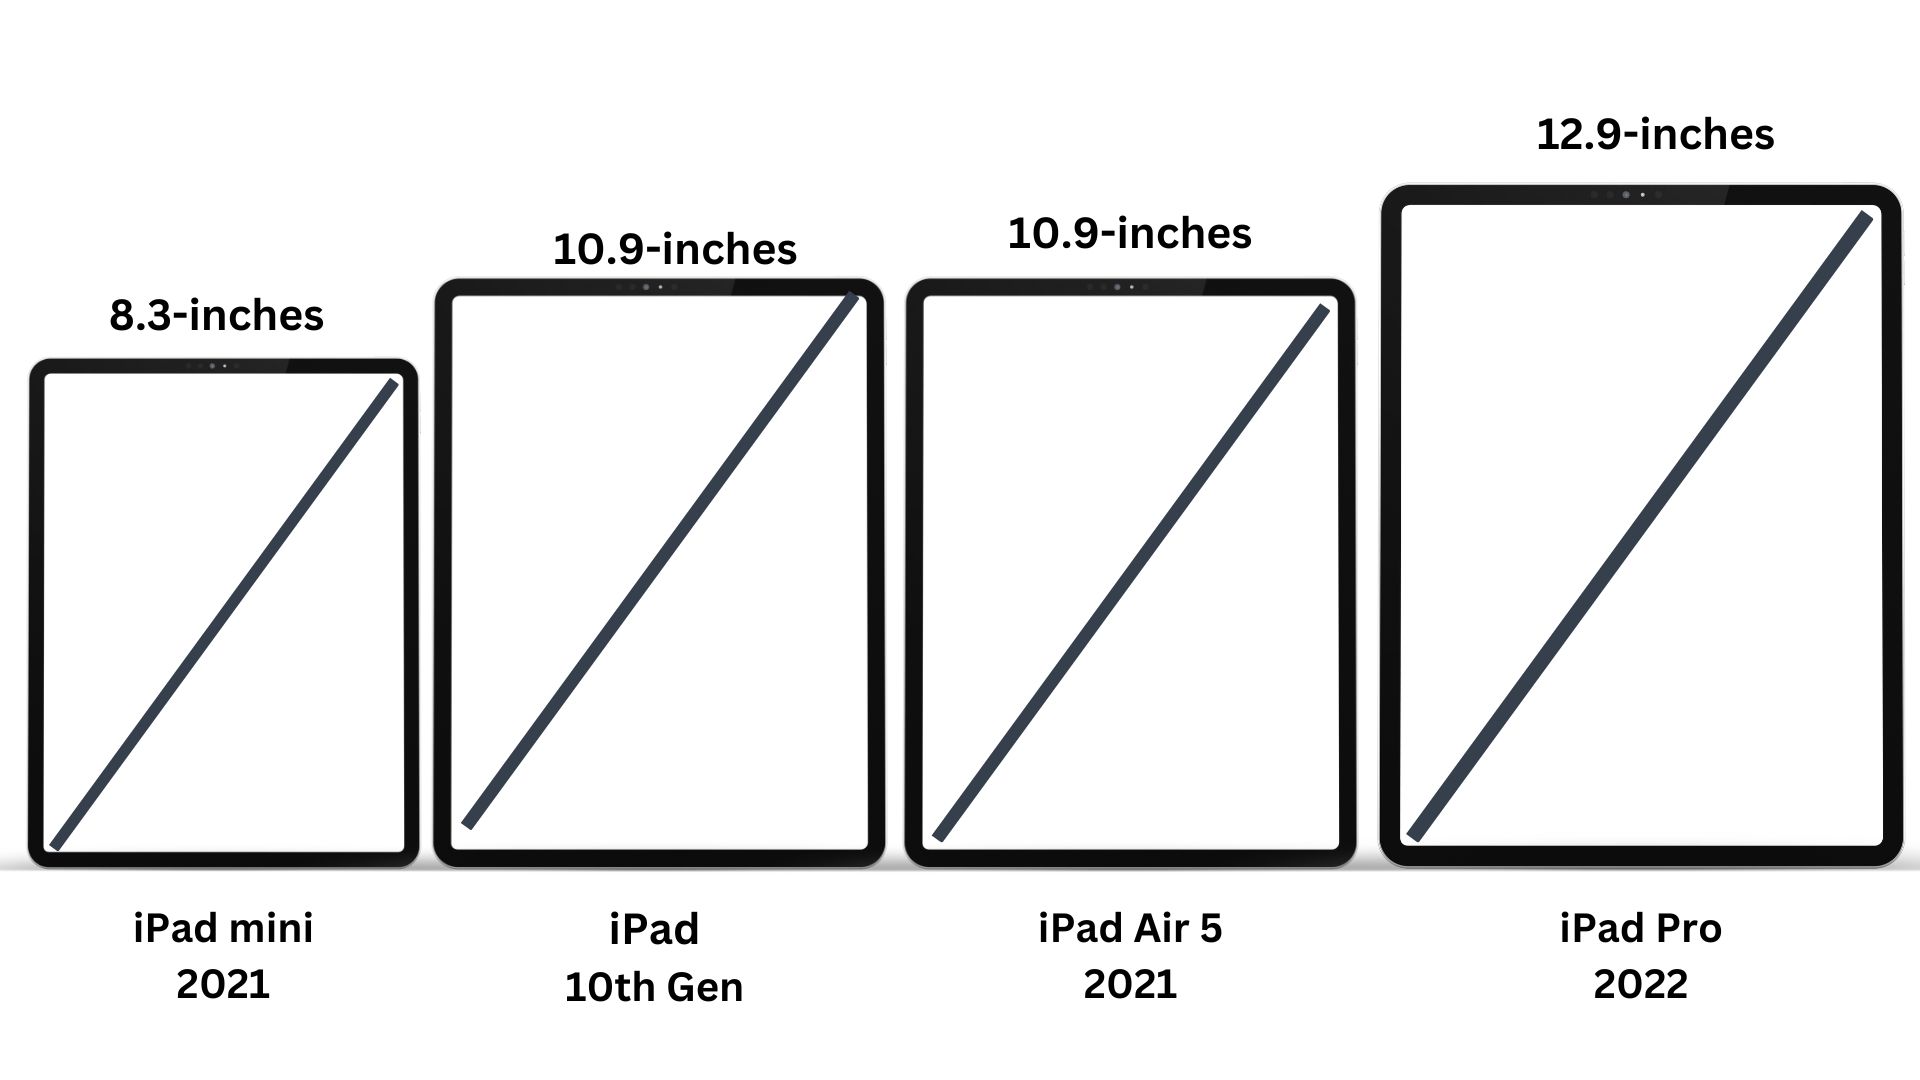 What are the sizes of iPads? iPad dimensions explained